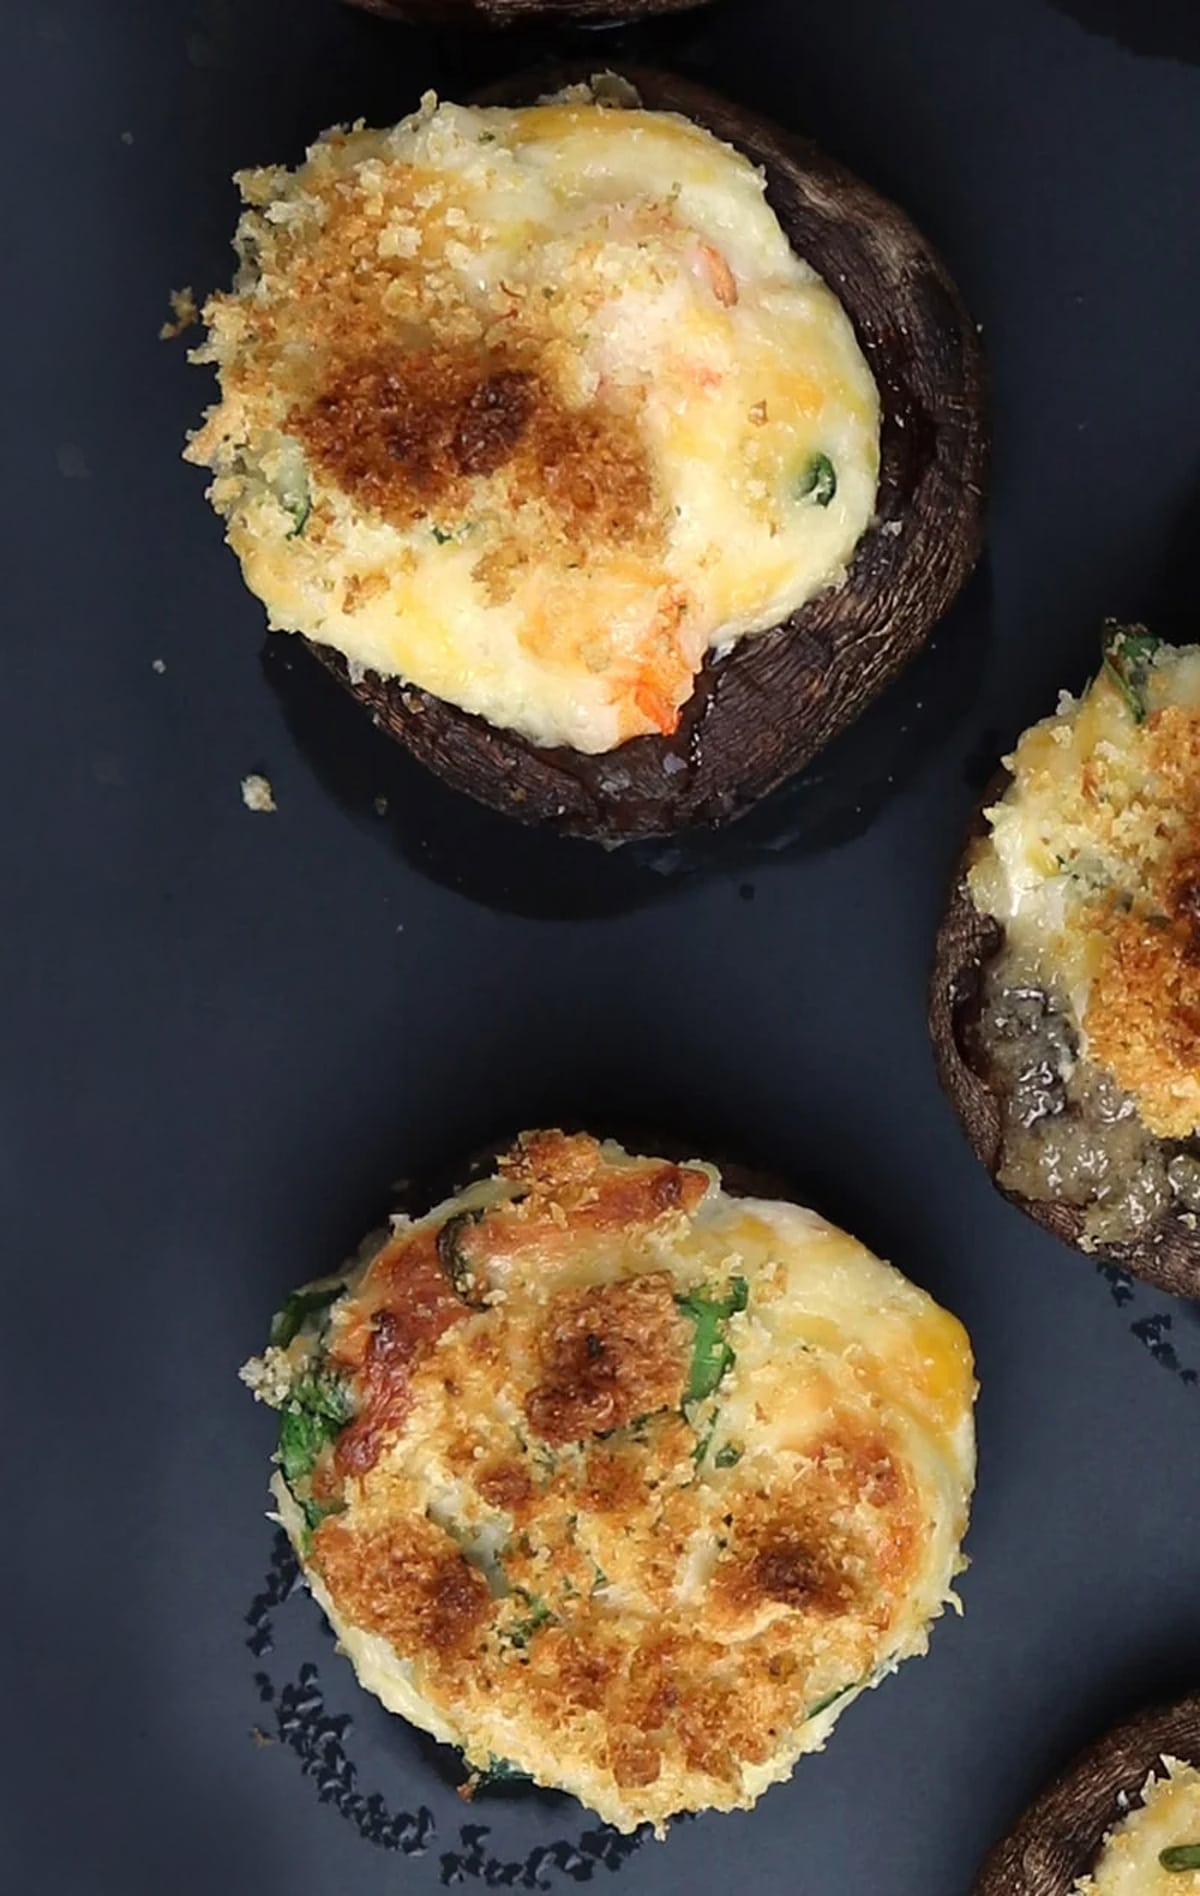 Stuffed mushroom caps filled with shrimp, cheese, spinach, and breadcrumbs.